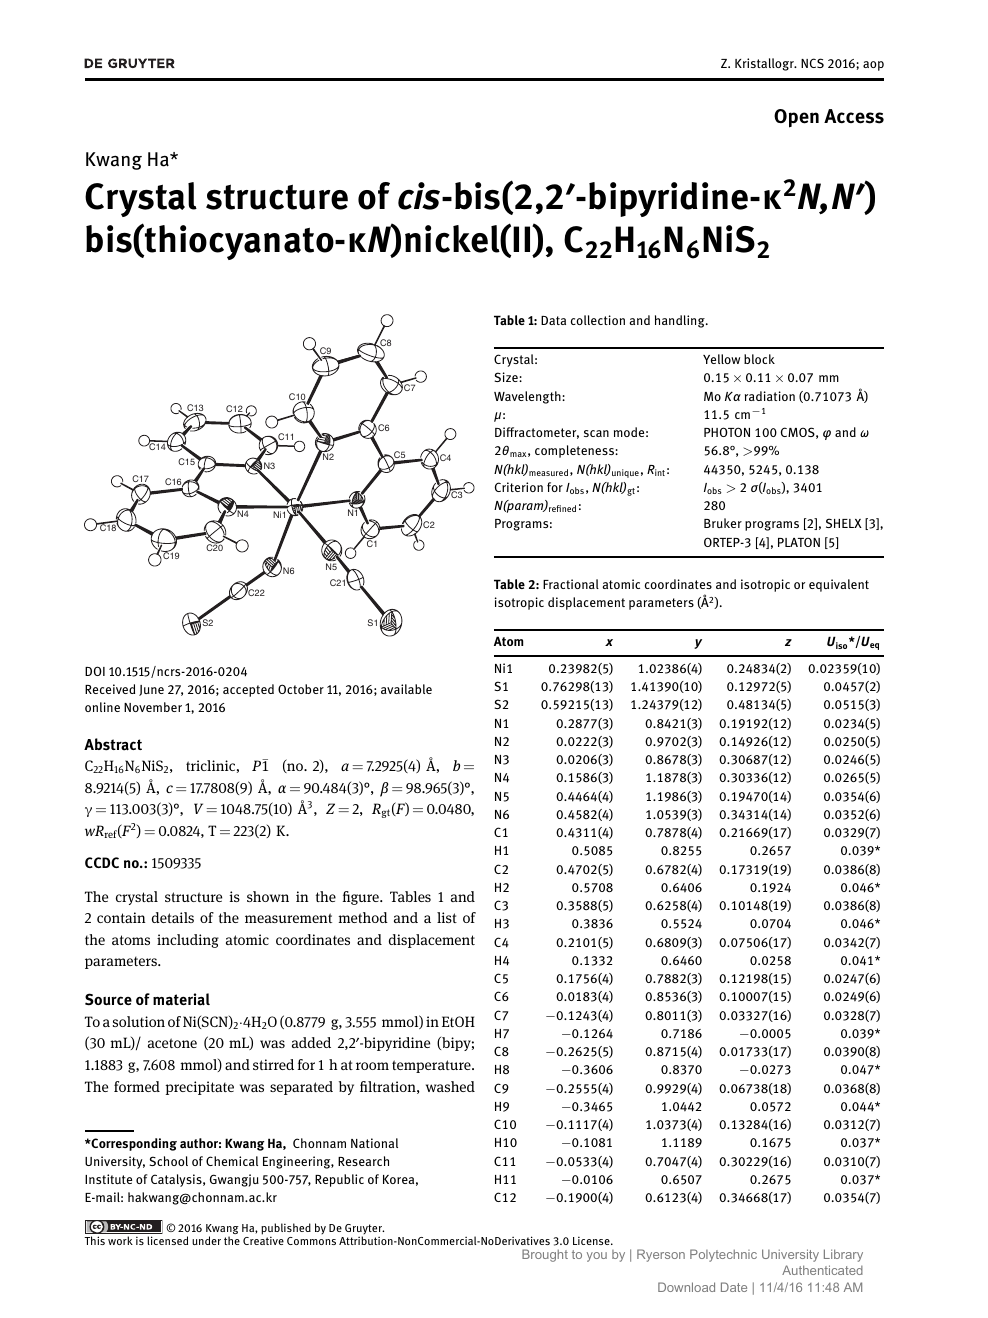 Crystal Structure Of Cis Bis 2 2 Bipyridine K2n N Bis Thiocyanato Kn Nickel Ii C22h16n6nis2 Topic Of Research Paper In Biological Sciences Download Scholarly Article Pdf And Read For Free On Cyberleninka Open Science Hub